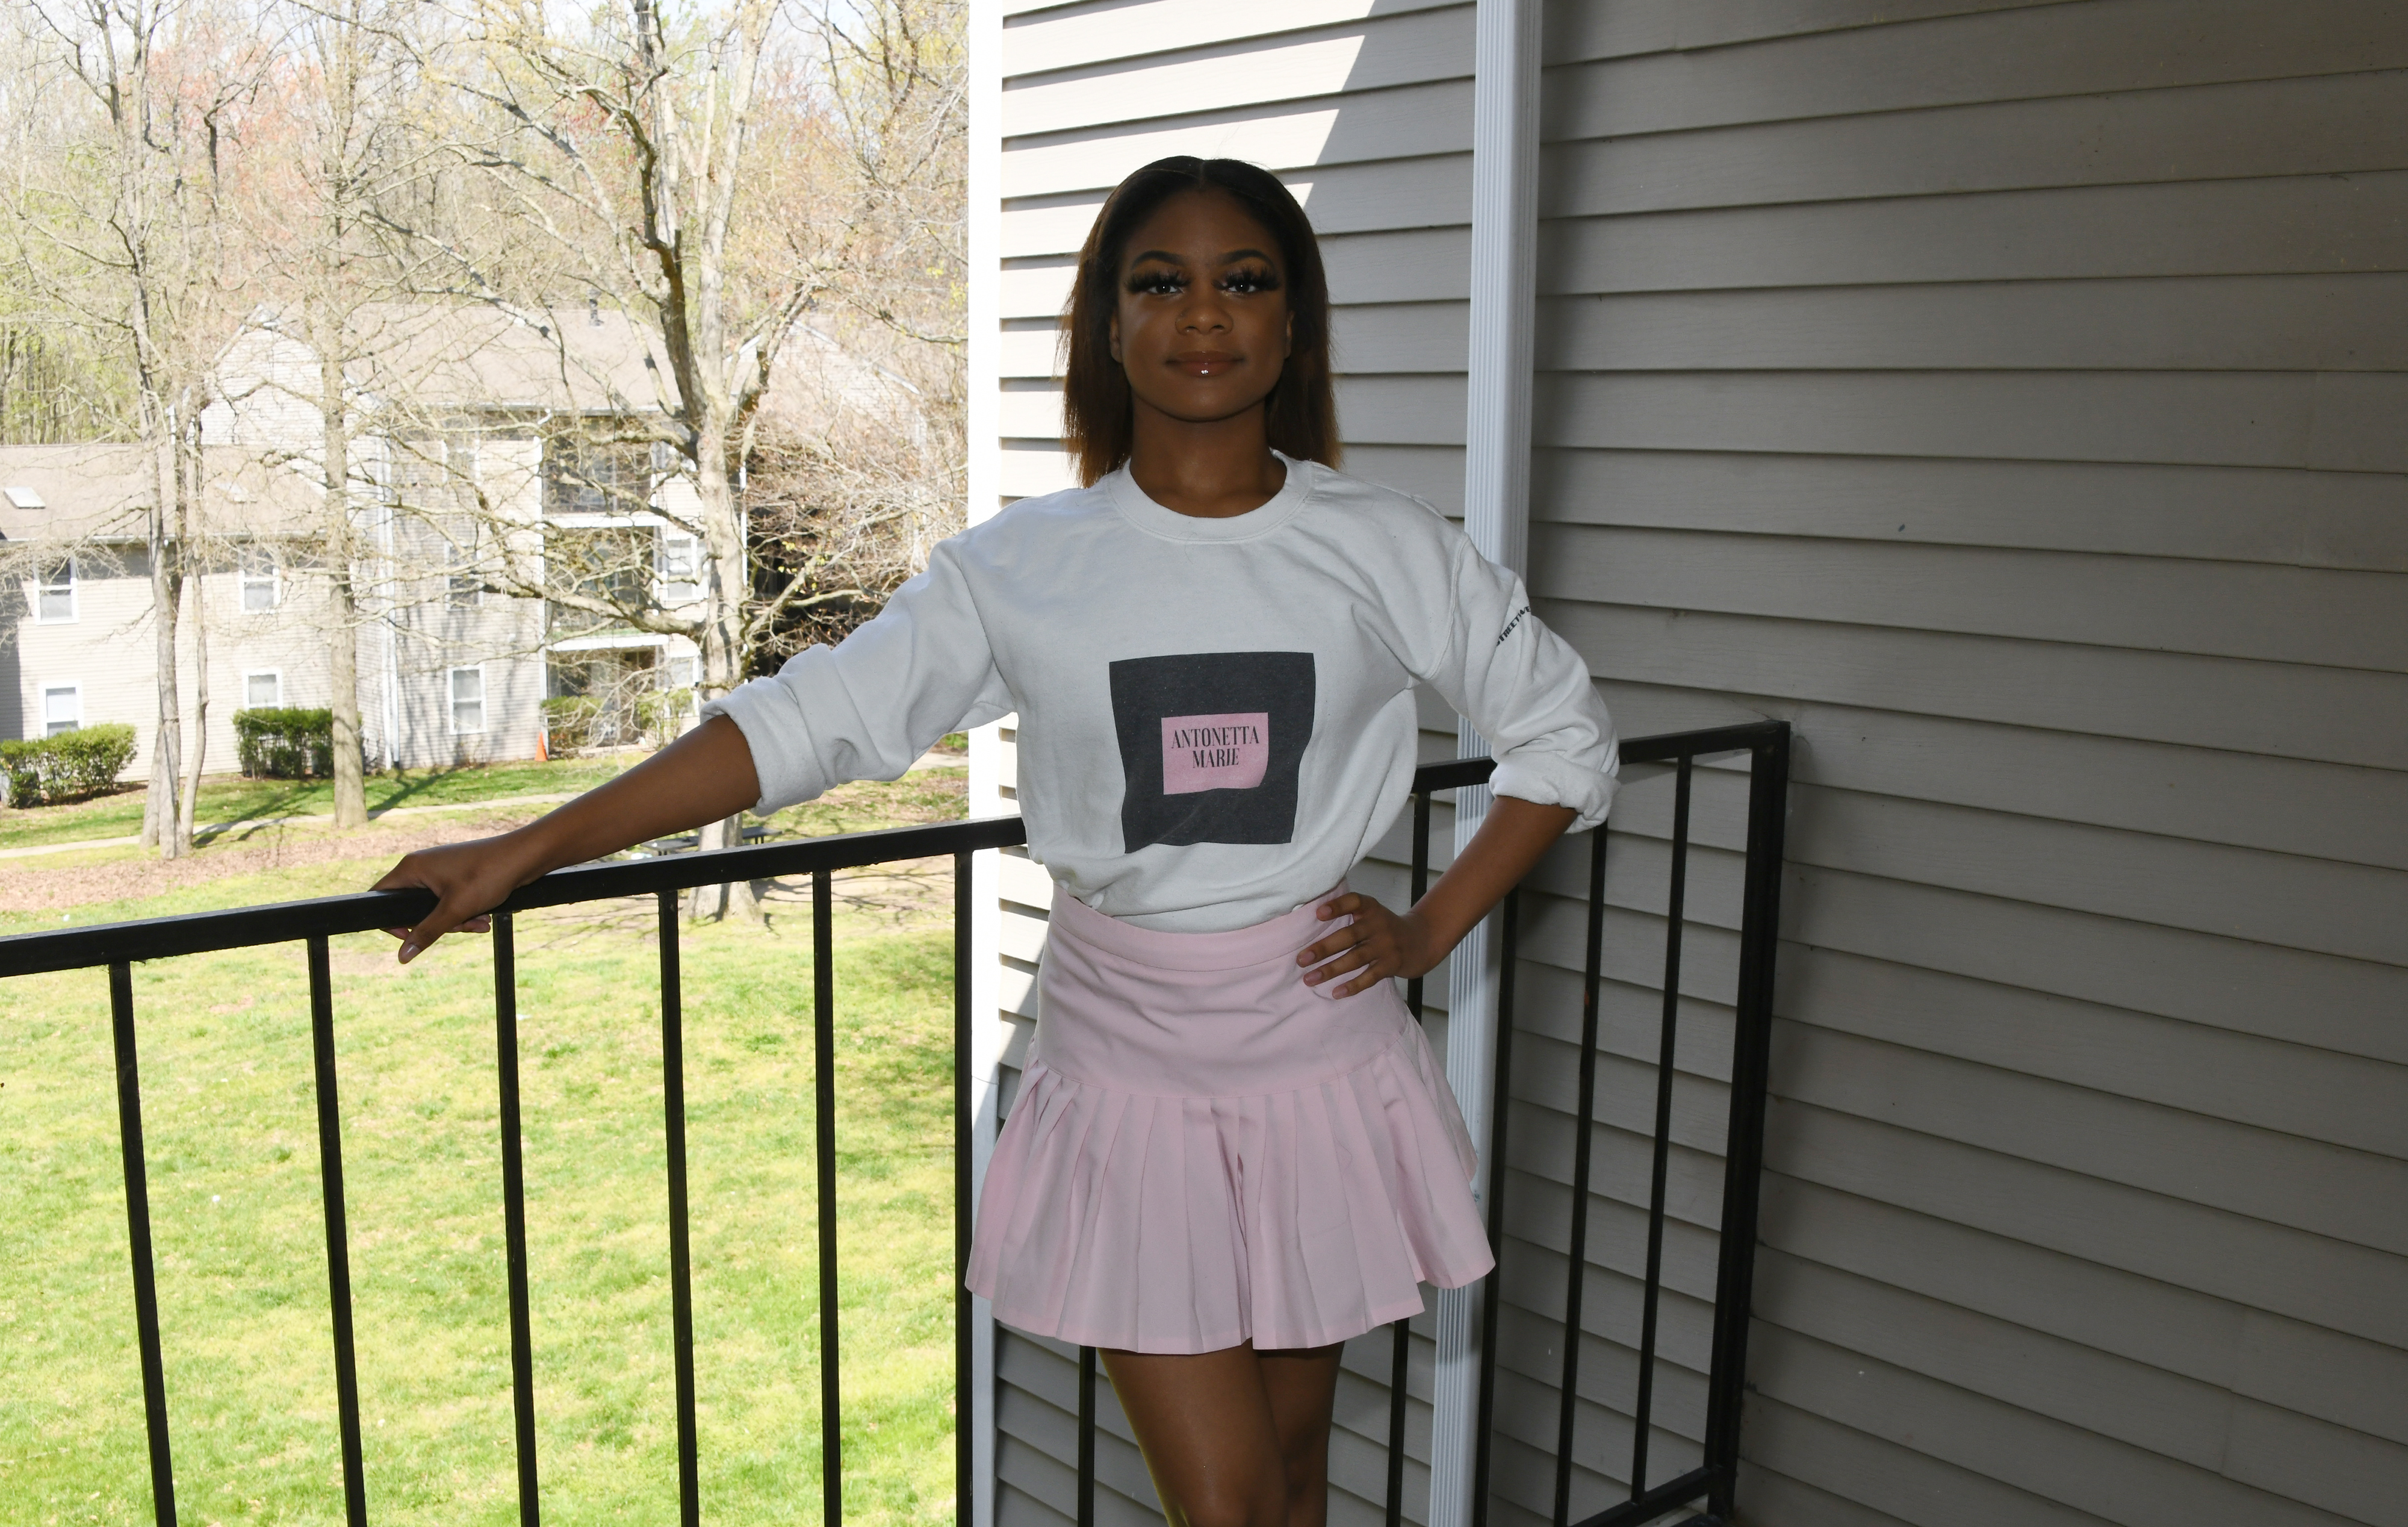 Antonetta M. Savoury, a junior Textiles and Apparel Studies major, models a shirt and skirt outfit that she markets on her Antonetta Marie Luxury Street Wear website business.